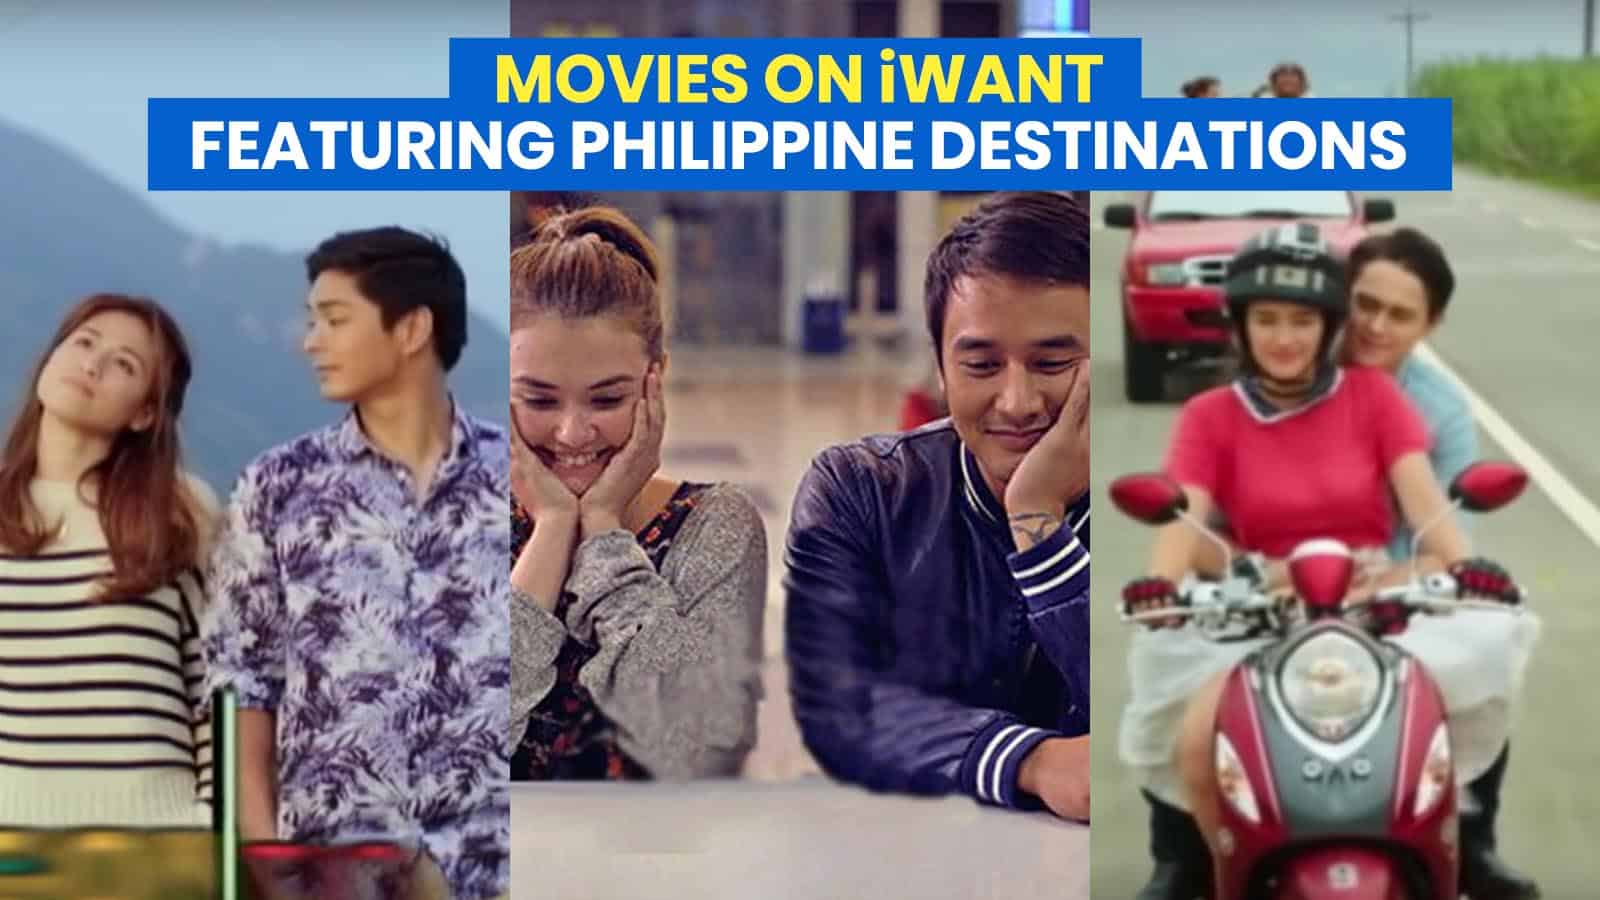 11 Movies Showcasing Philippine Destinations that You can Watch on iWant